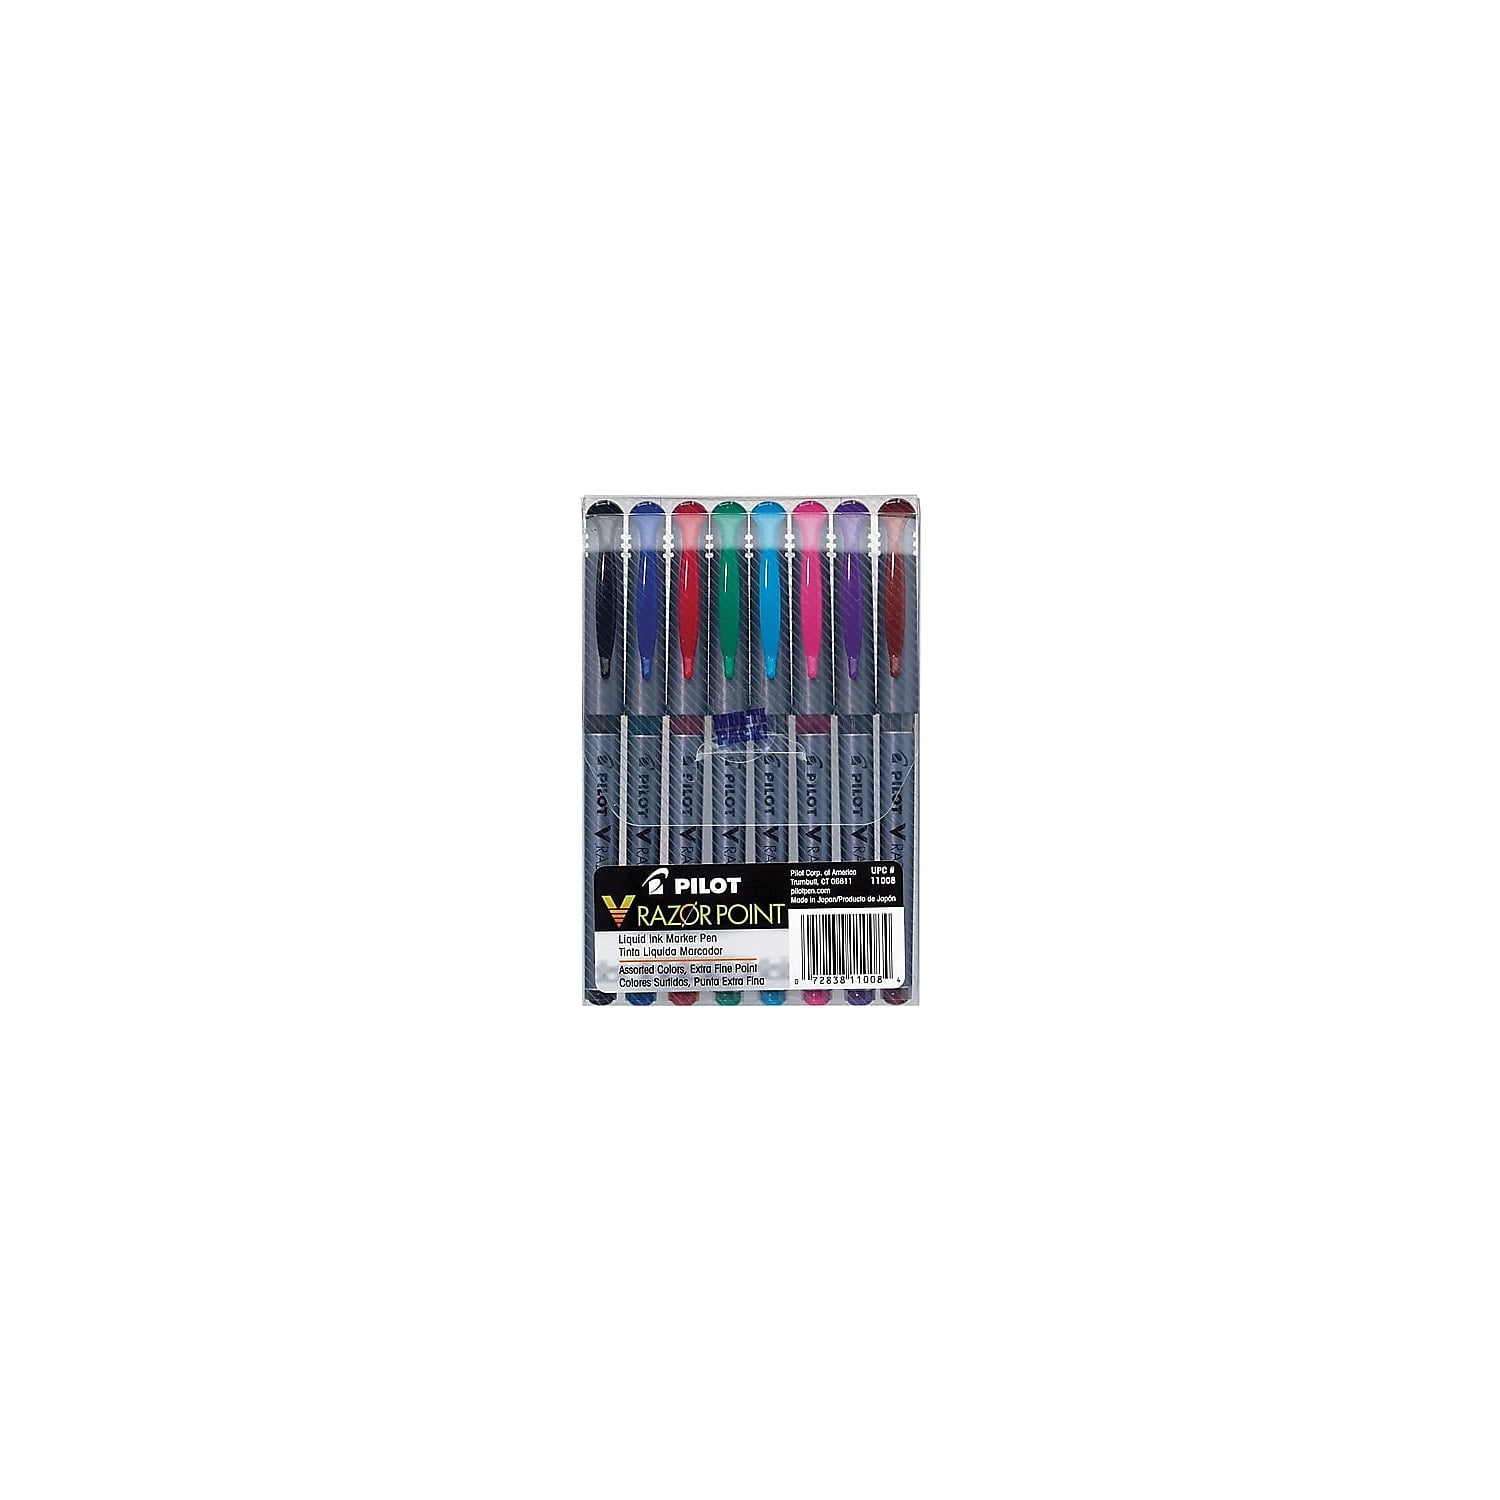 Pilot V Razor Point Pens Assorted 8-pack Pouch - 11008 - Pens, Fountain Pens,  Writing Instruments, Ink, Stationery, Office Supplies